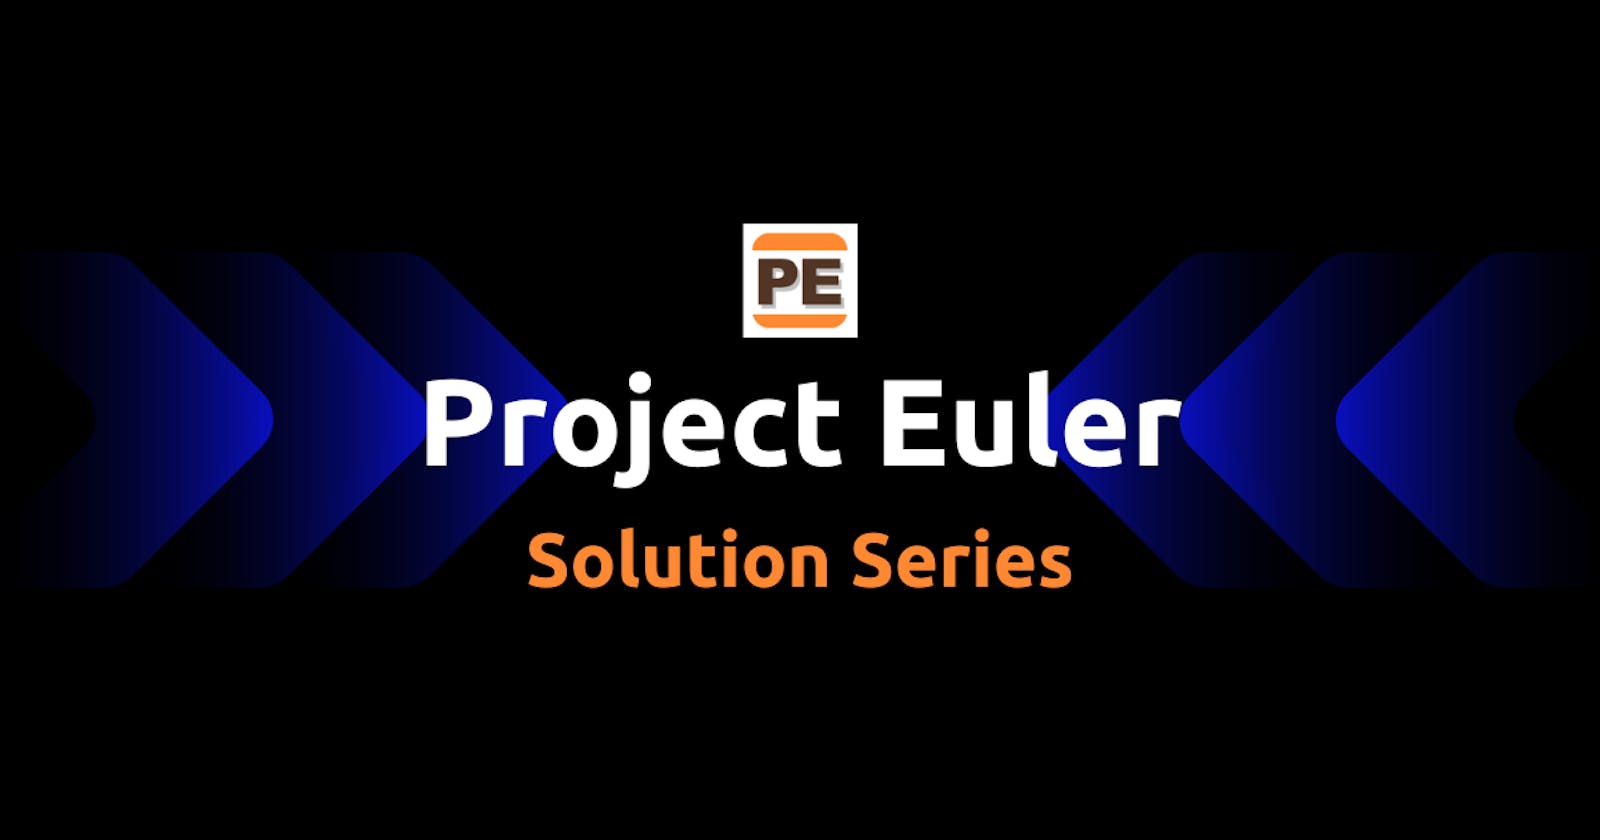 Project Euler: About the Solution Series